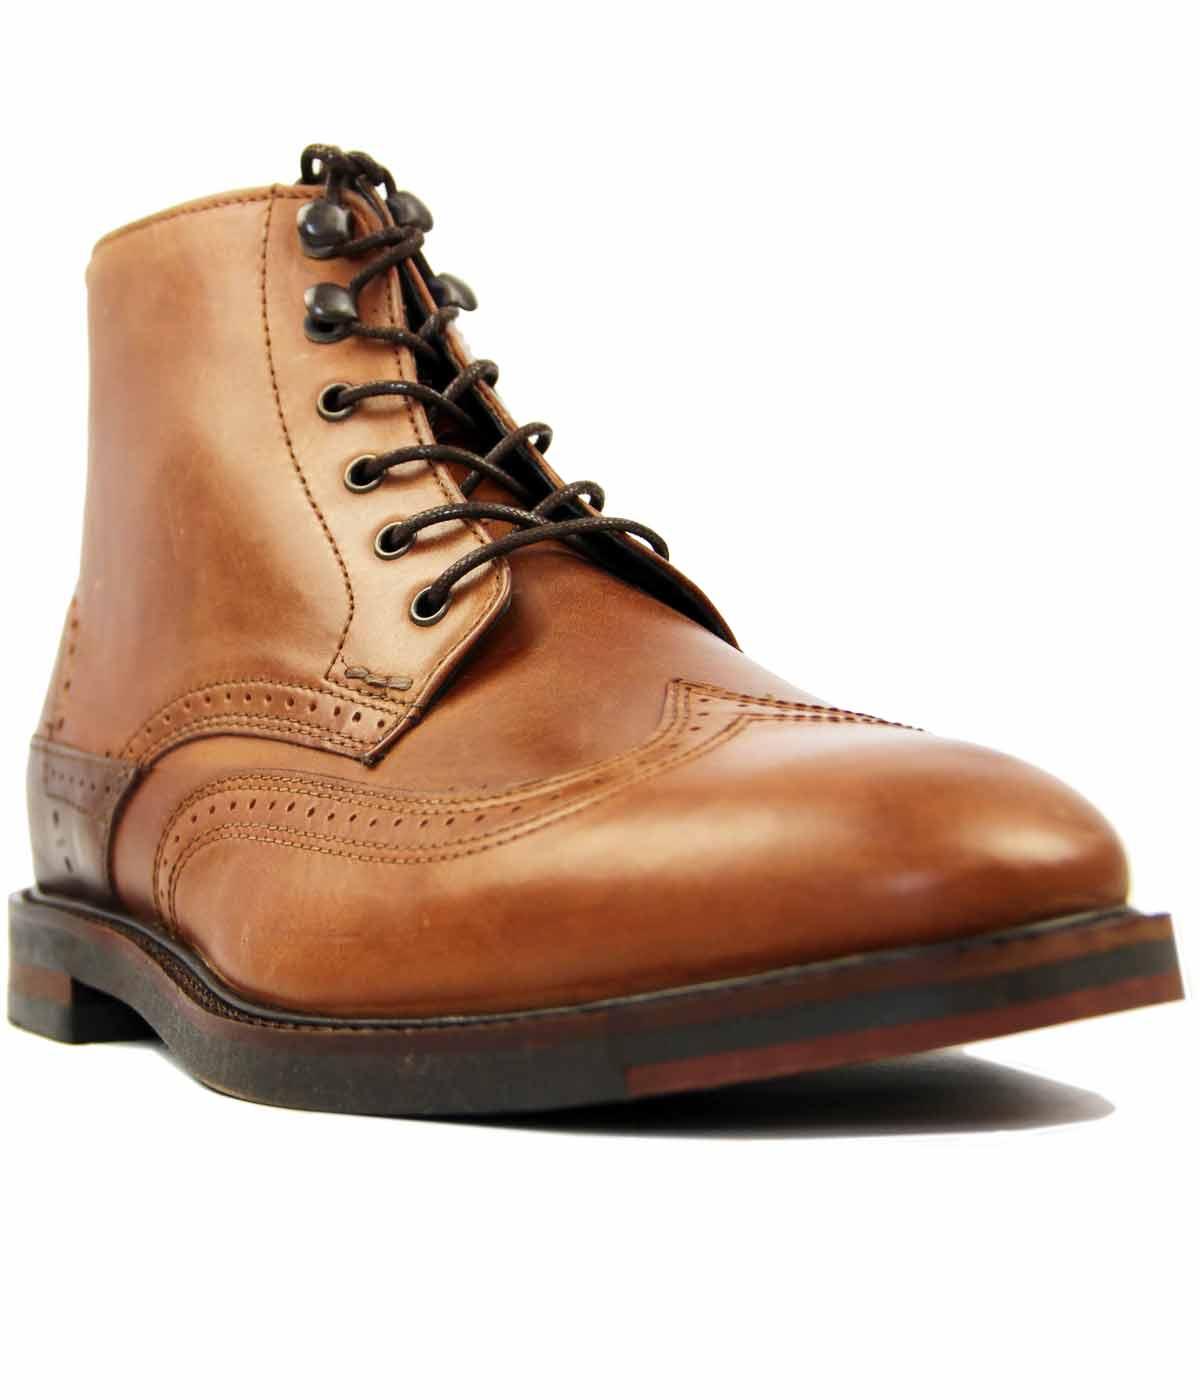 H by HUDSON Harland Retro Mod Grain Leather Wingtip Brogue Boots